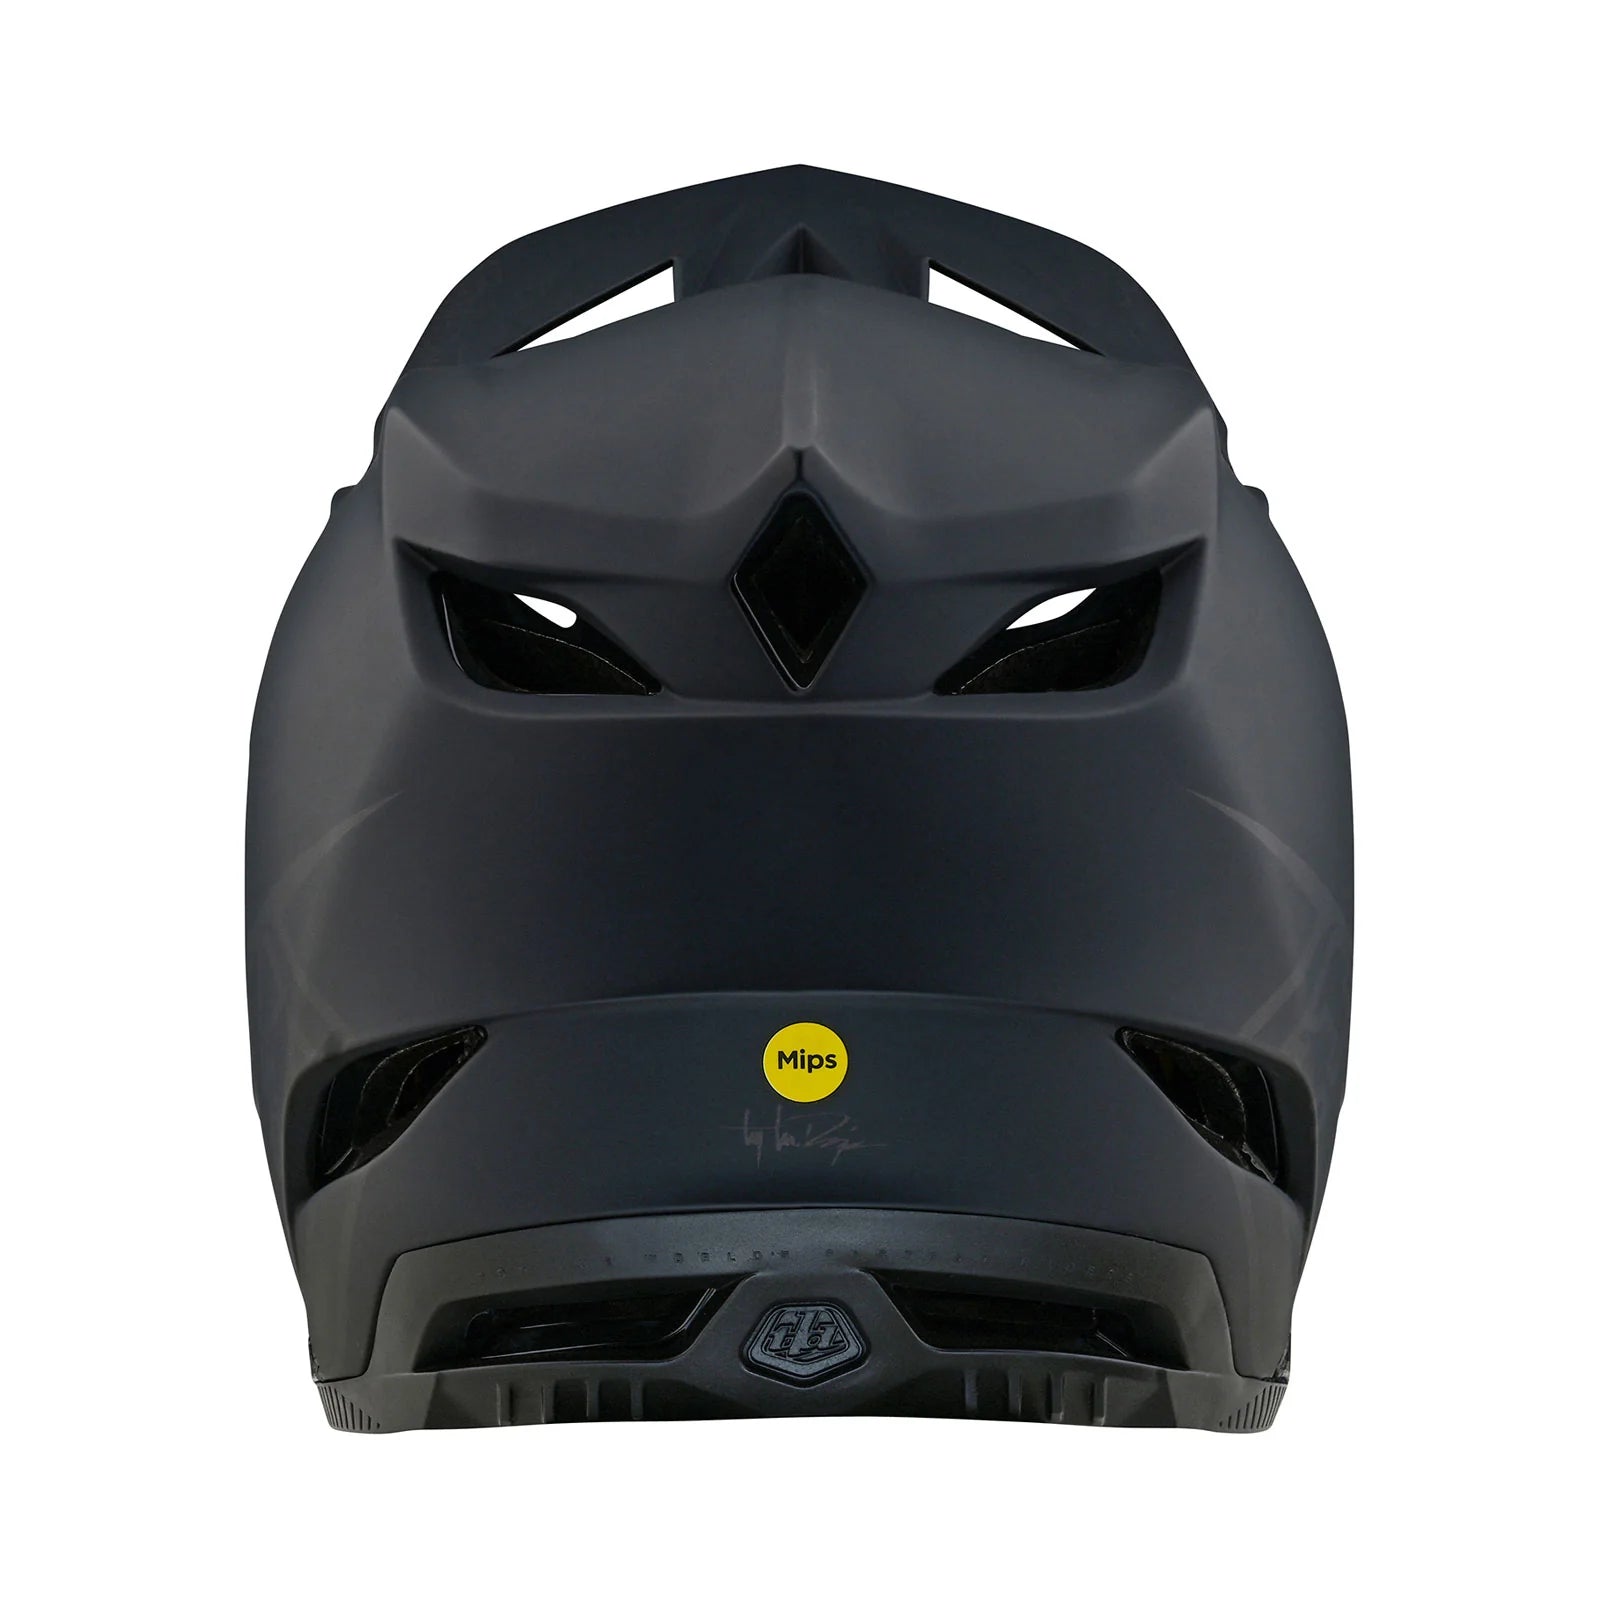 A TLD D4 AS Composite helmet with Mips® C2 protection system on a white background.